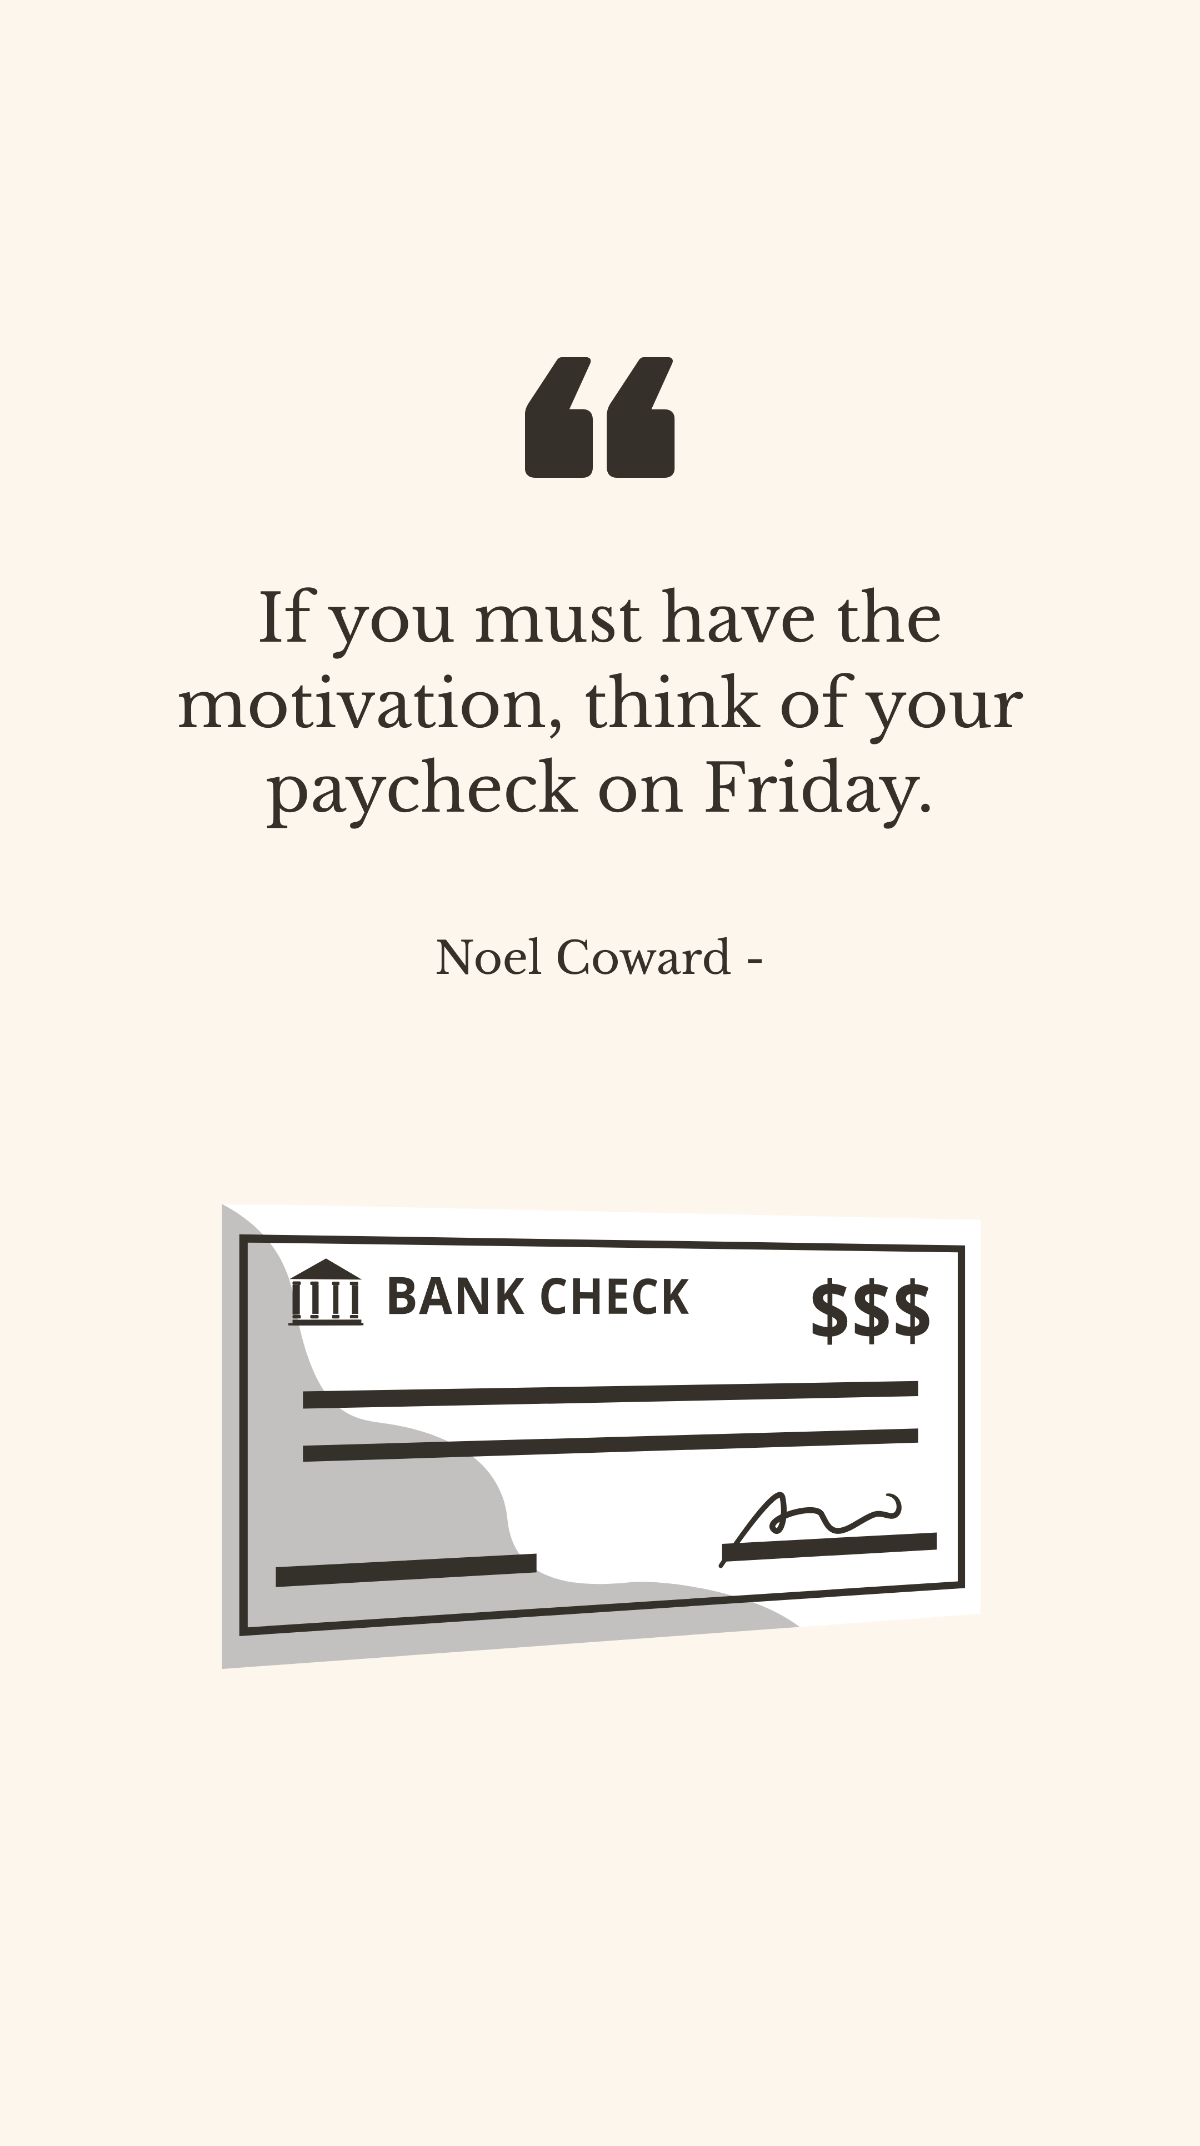 Noel Coward - If you must have the motivation, think of your paycheck on Friday. Template